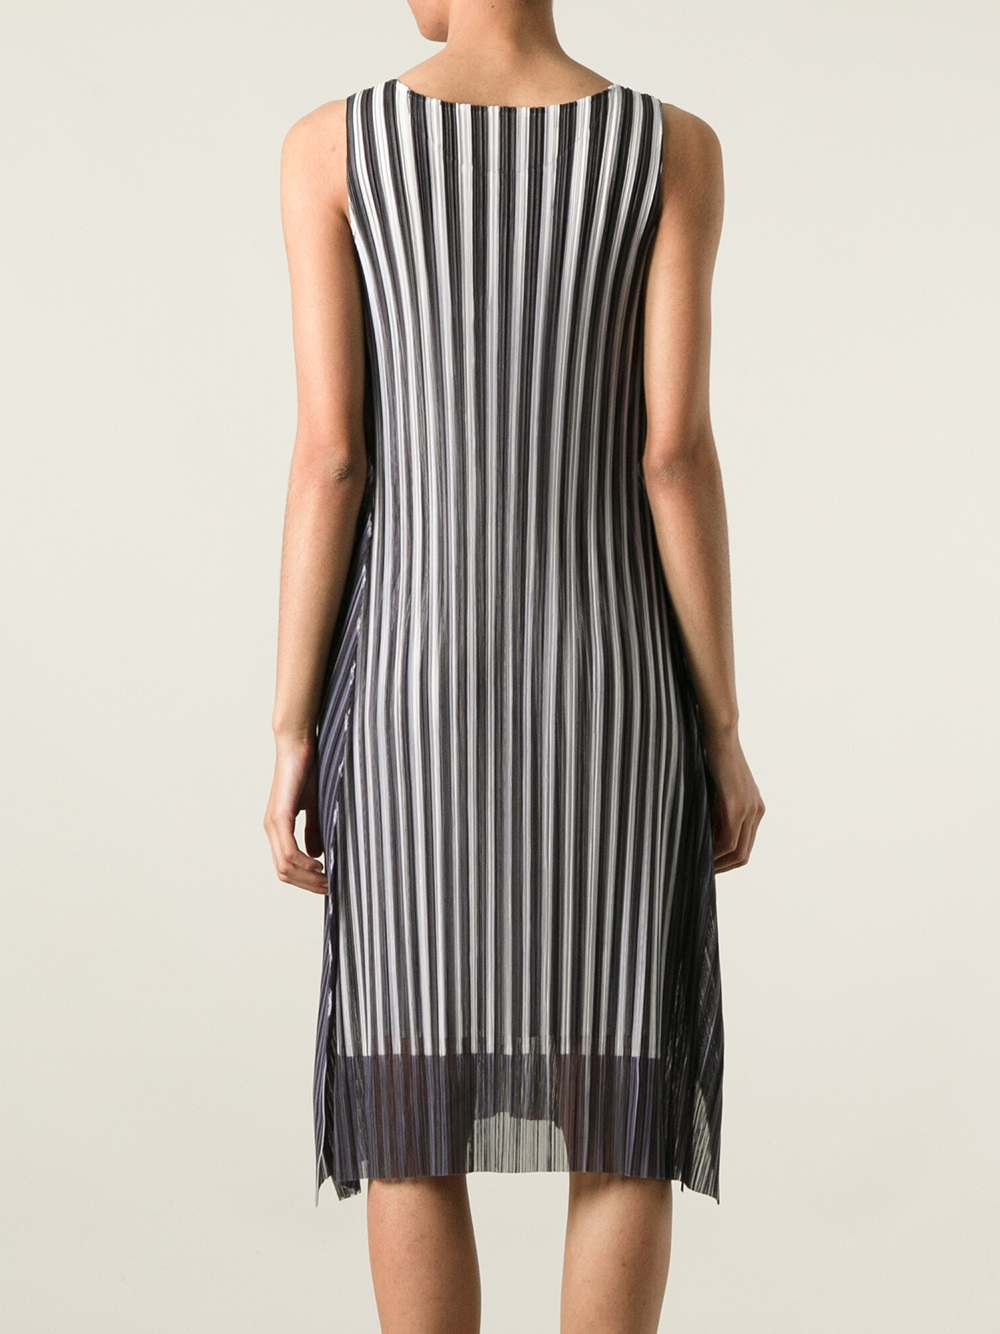 Lyst - Pleats please issey miyake Layered Pleated Dress in Black